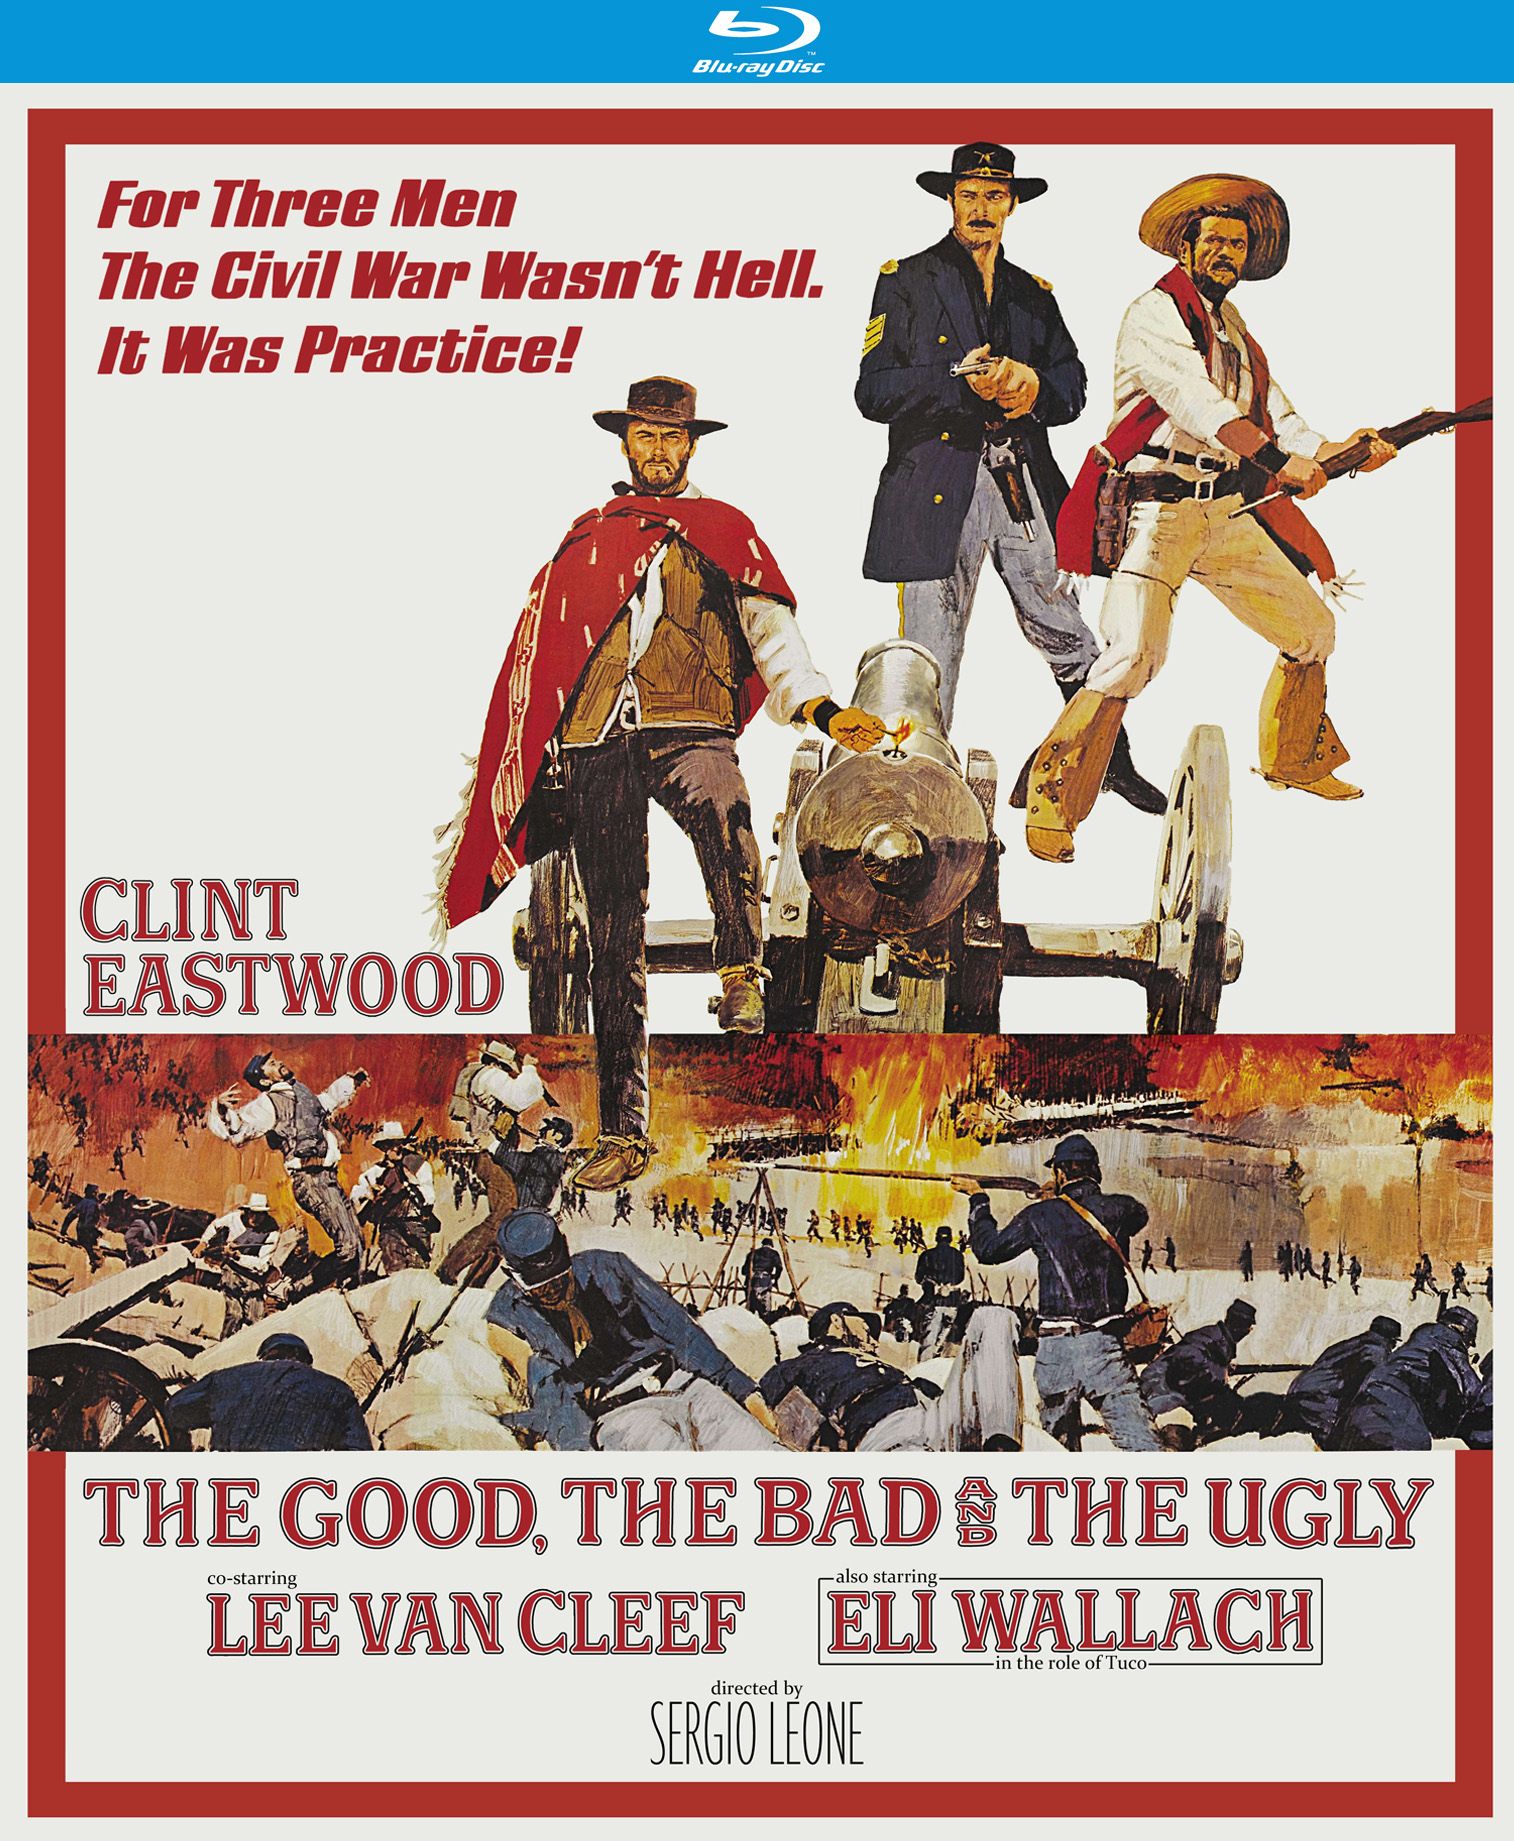 The Good, The Bad, and the Ugly.